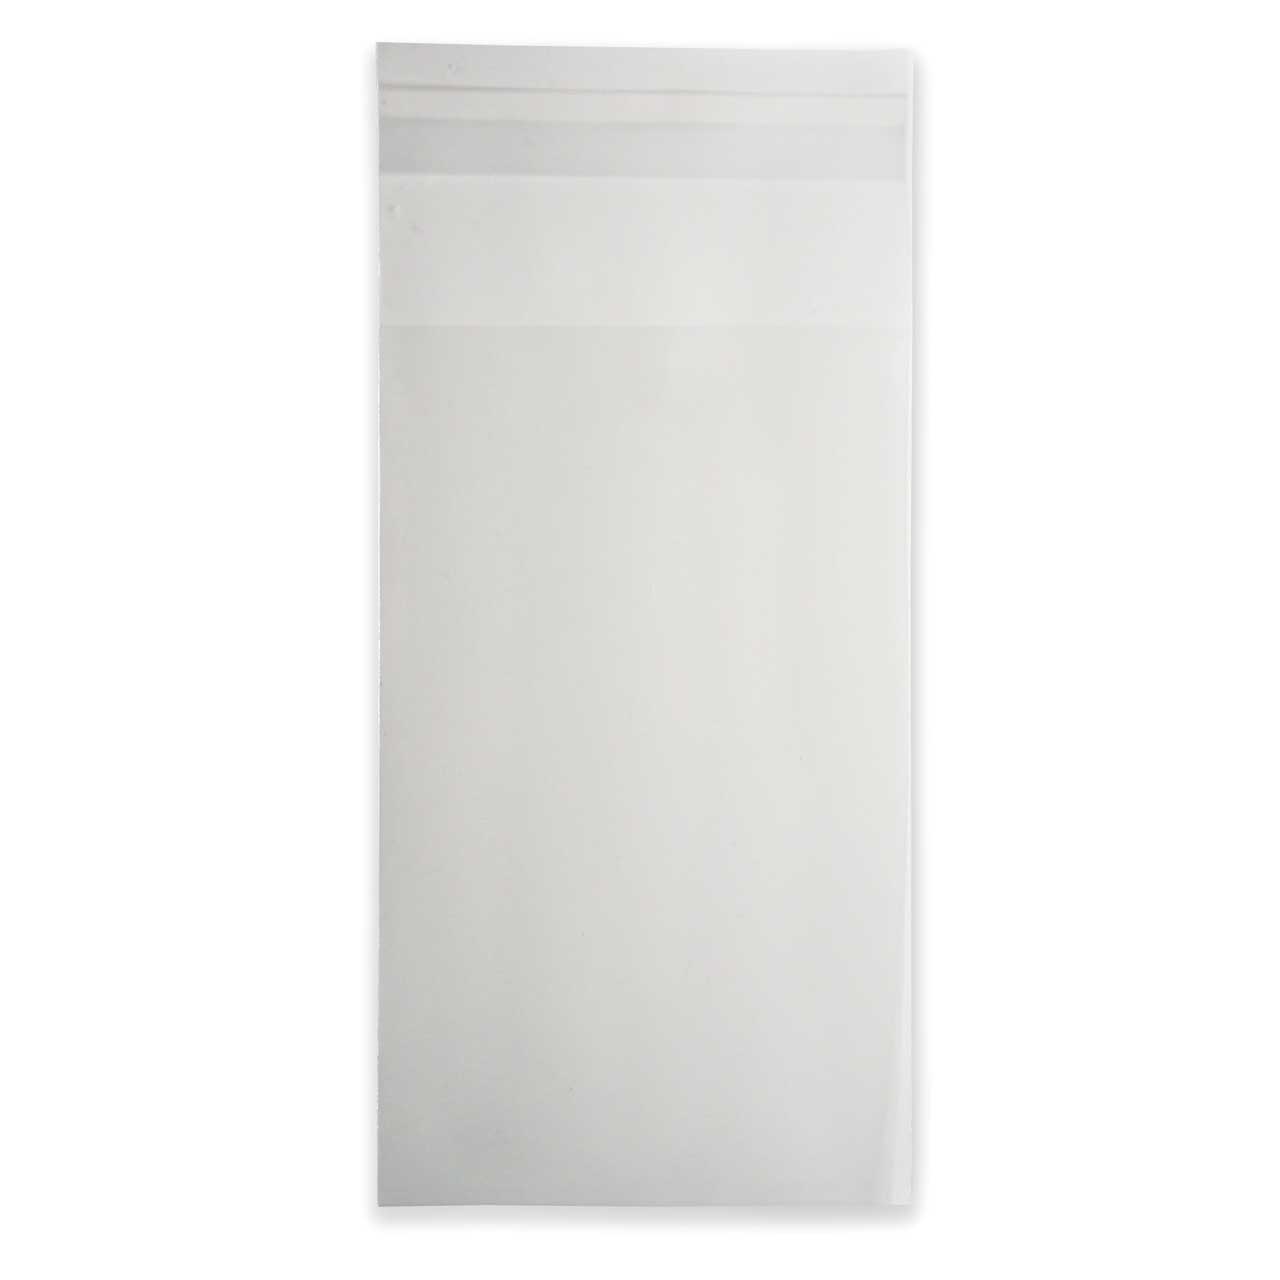 2 Mil Thick Ultra Clear Self Adhesive Resealable Clear Plastic Cellophane Poly Bag (100 Bags) -Multiple Sizes Available